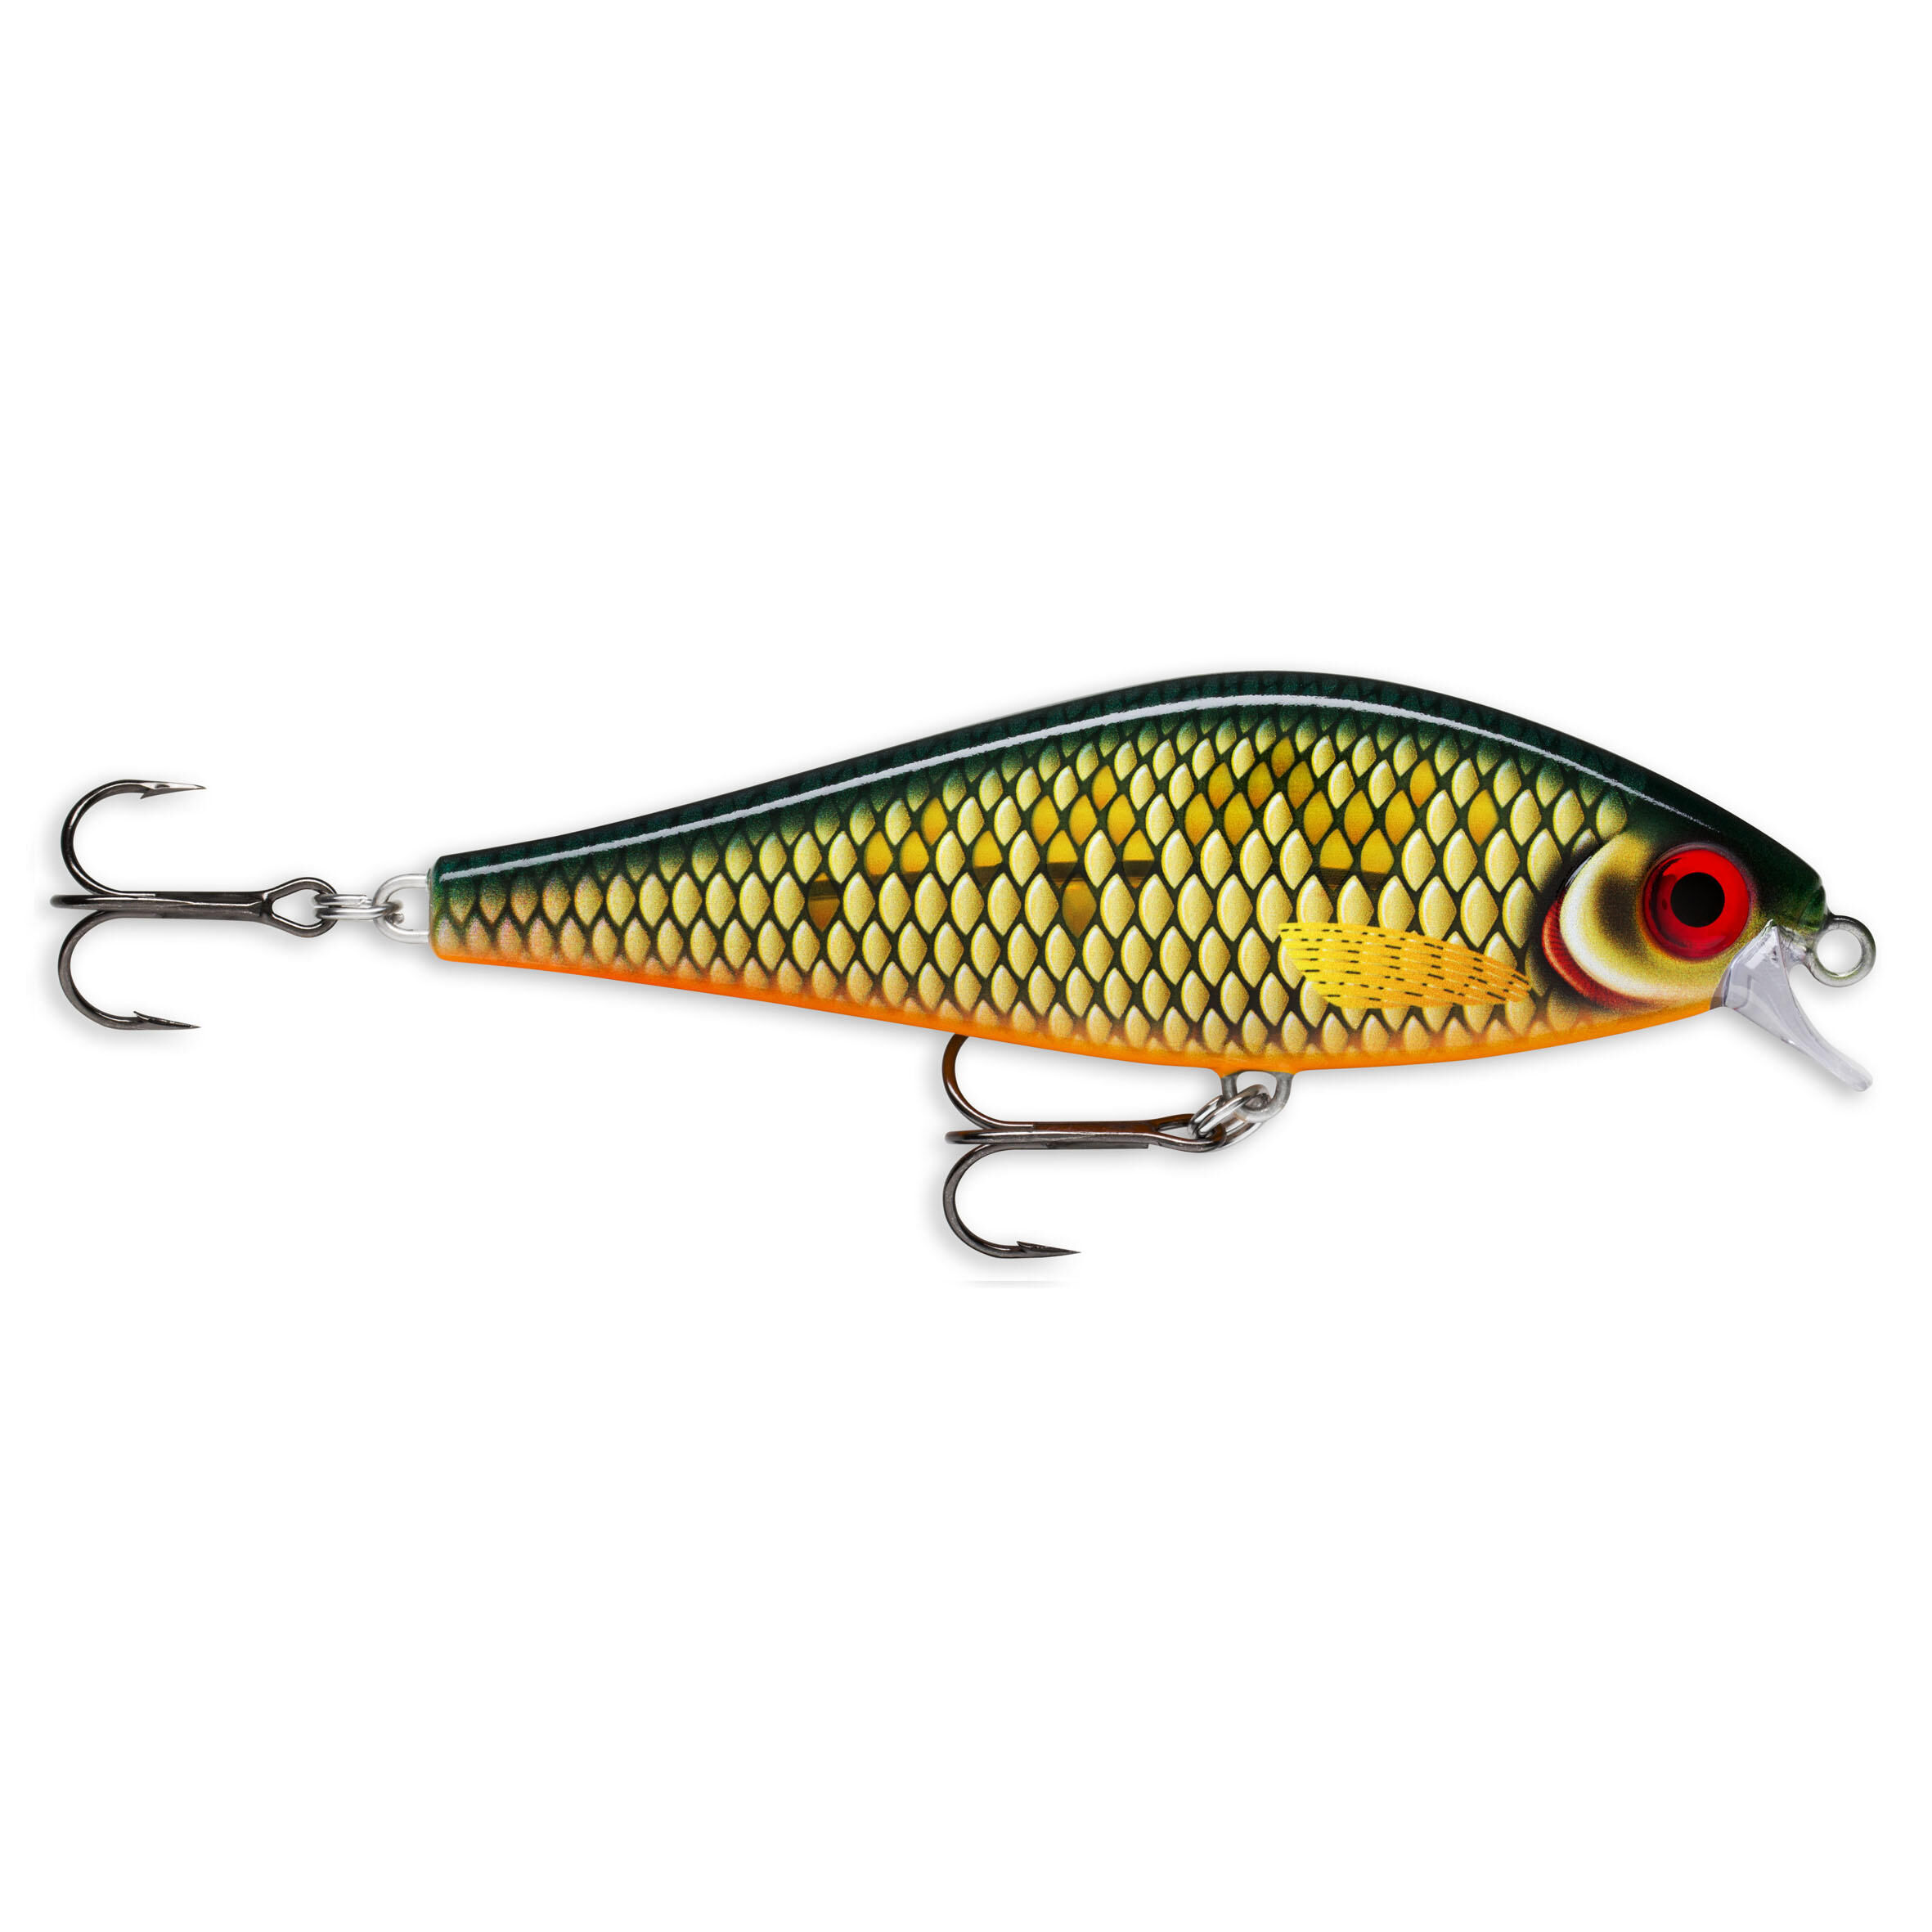 RAPALA SUPER SHADOW RAP 16 SCRR FOR LURE FISHING